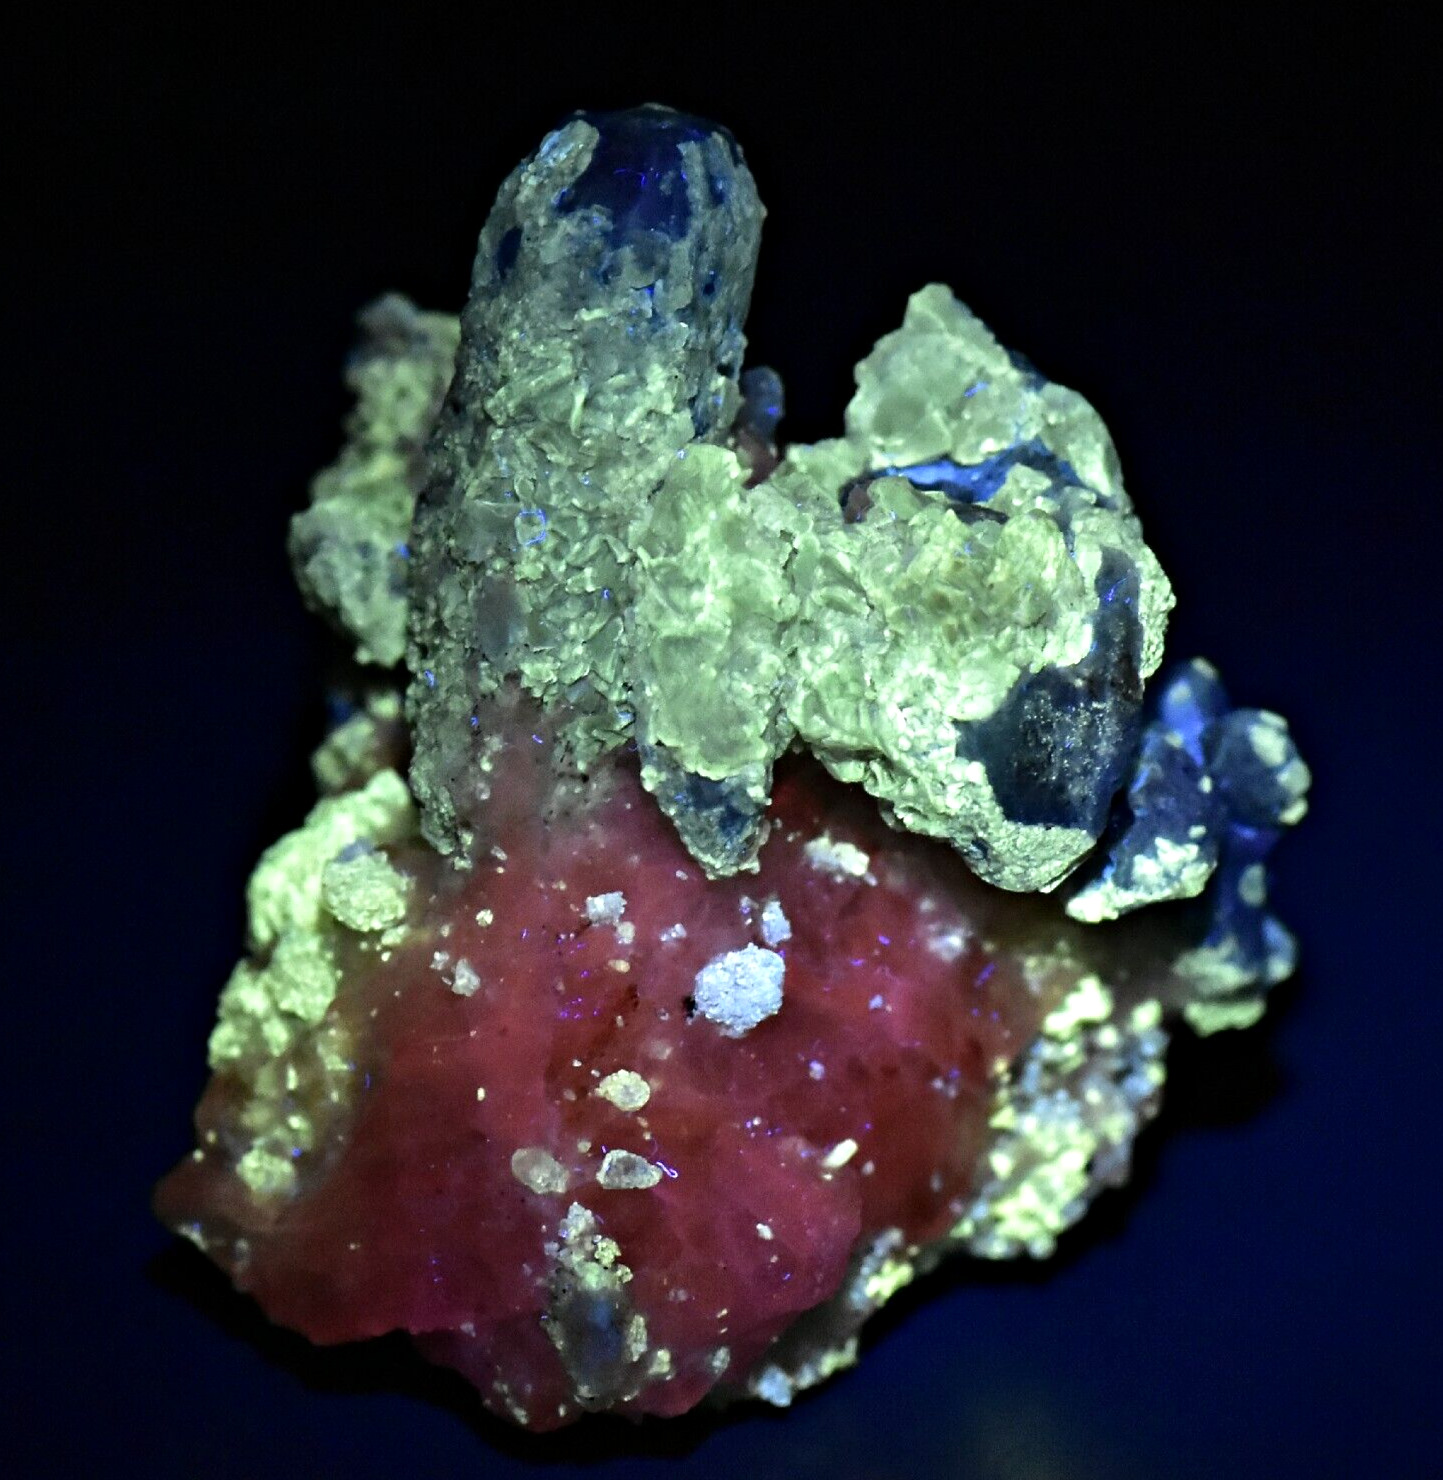 139 Carat Amazing Natural Fluorescent Afghanite Crystals With Mica On Matrix